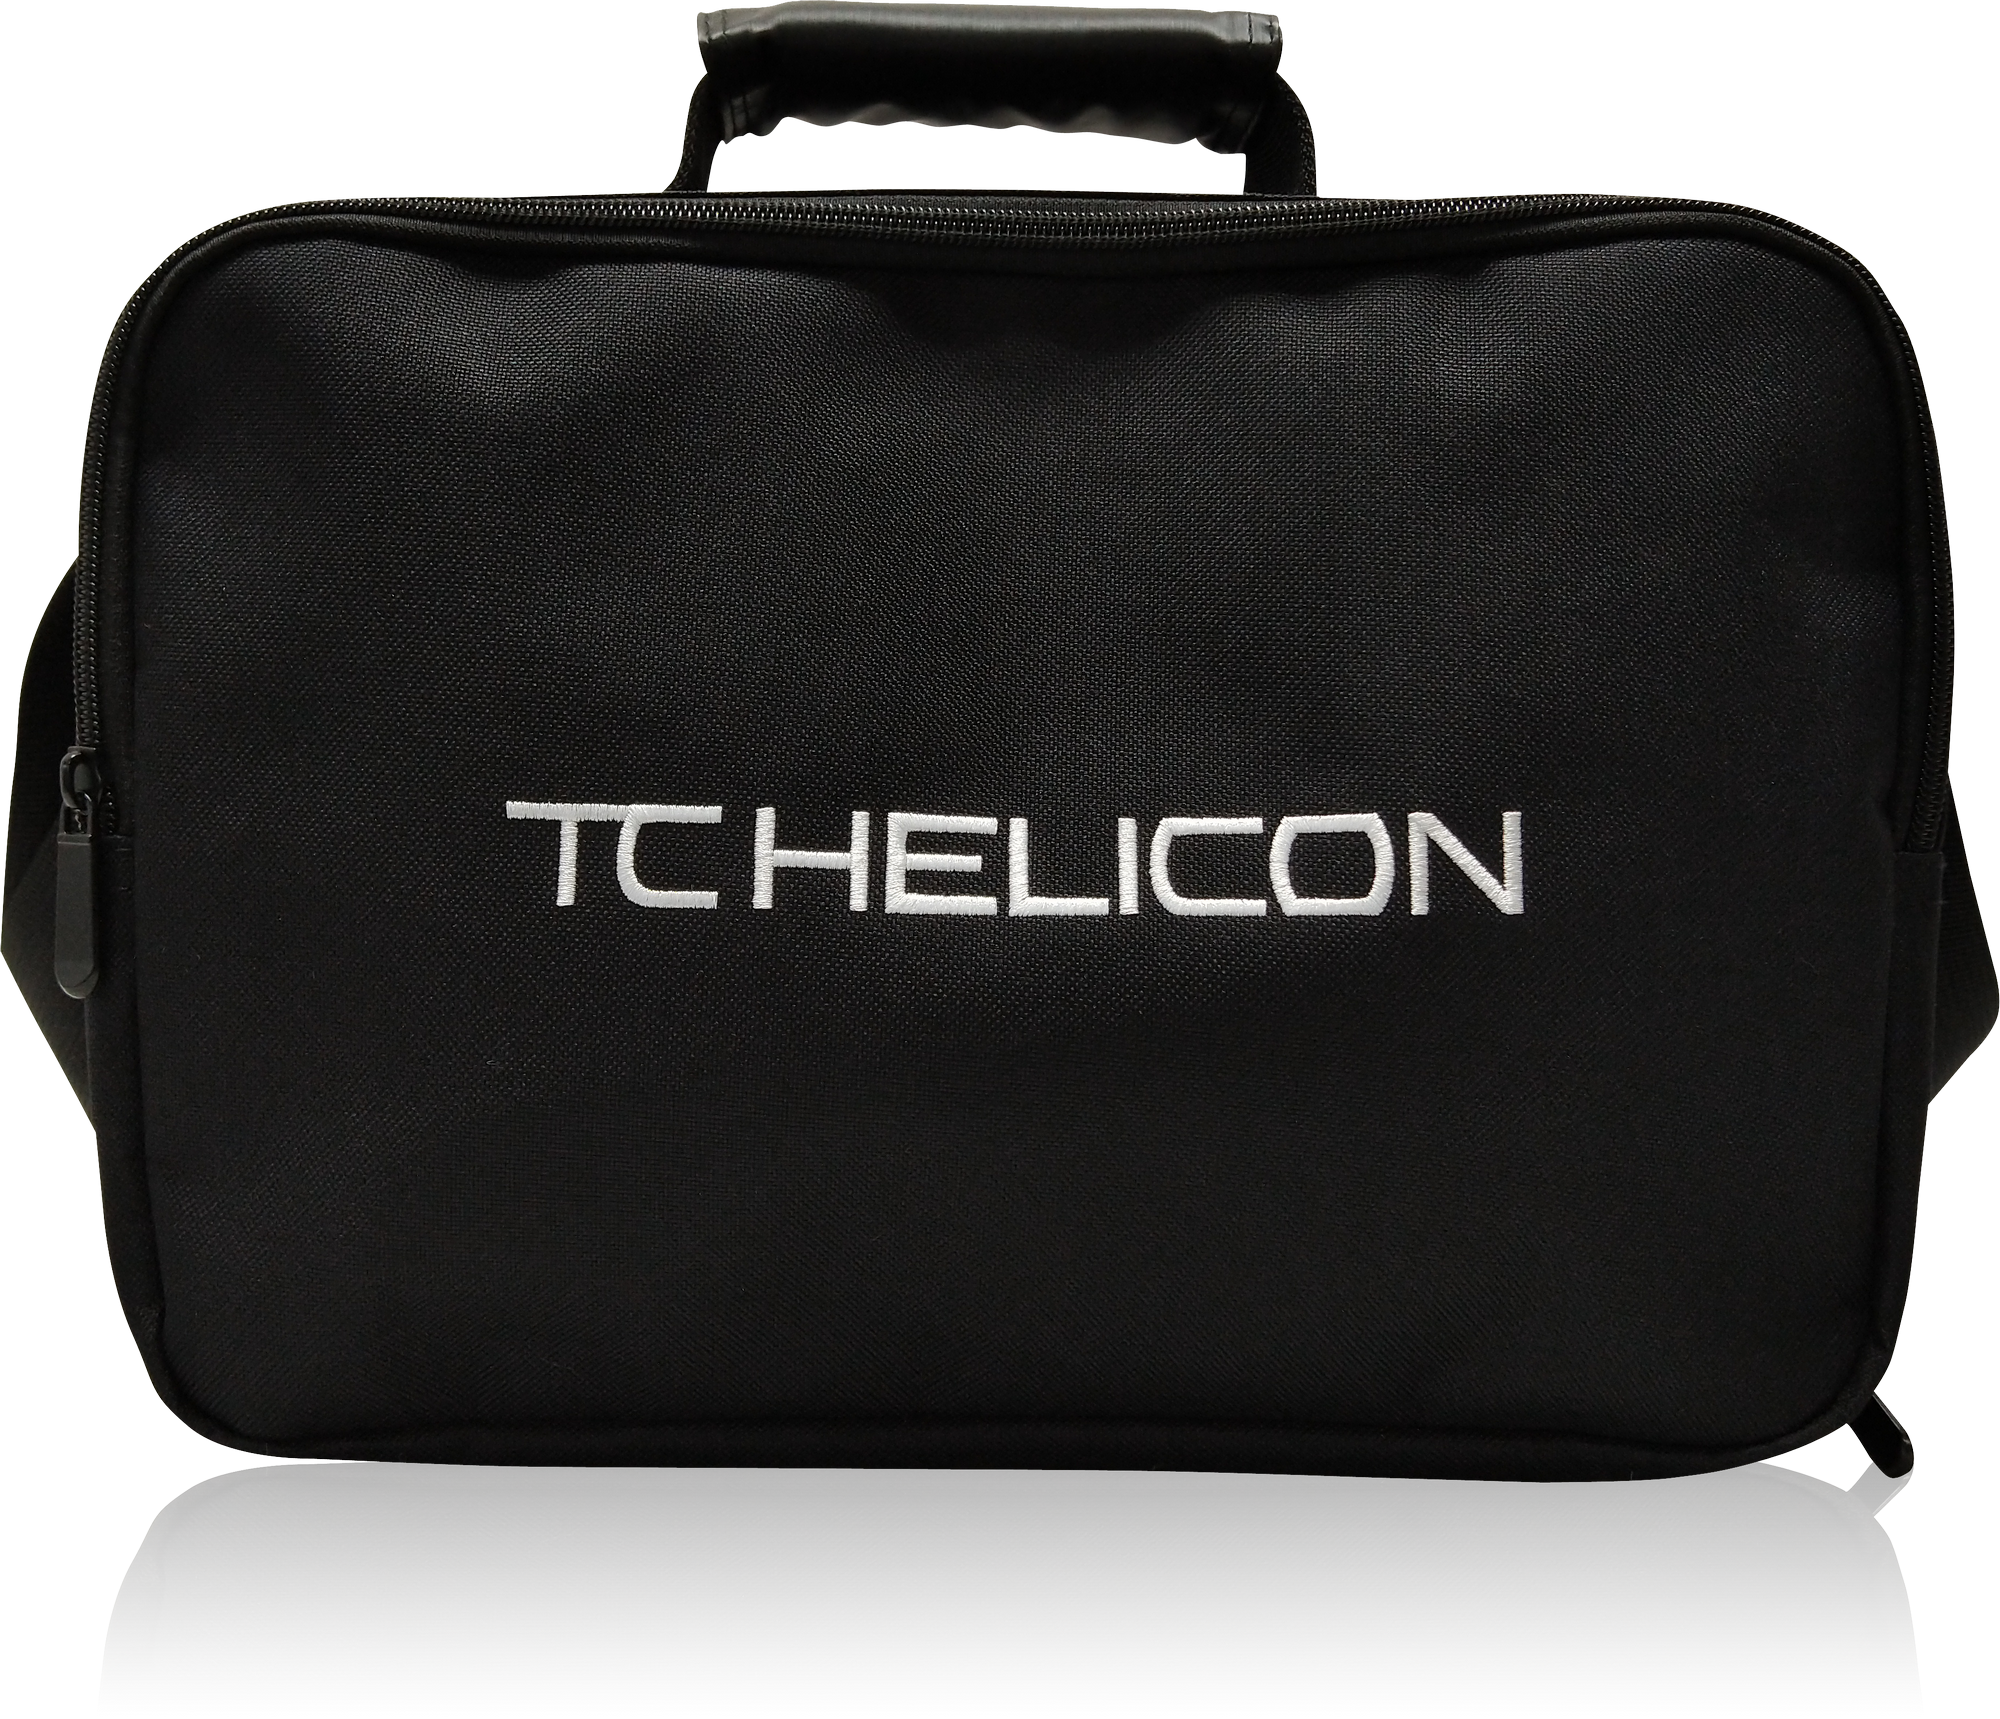 TC HELICON FX150 GIG BAG DURABLE TRAVEL BAG FOR VOICESOLO FX150, TC HELICON, CASES & GIG BAGS, tc-helicon-cases-gig-bags-fx150-gig-bag, ZOSO MUSIC SDN BHD